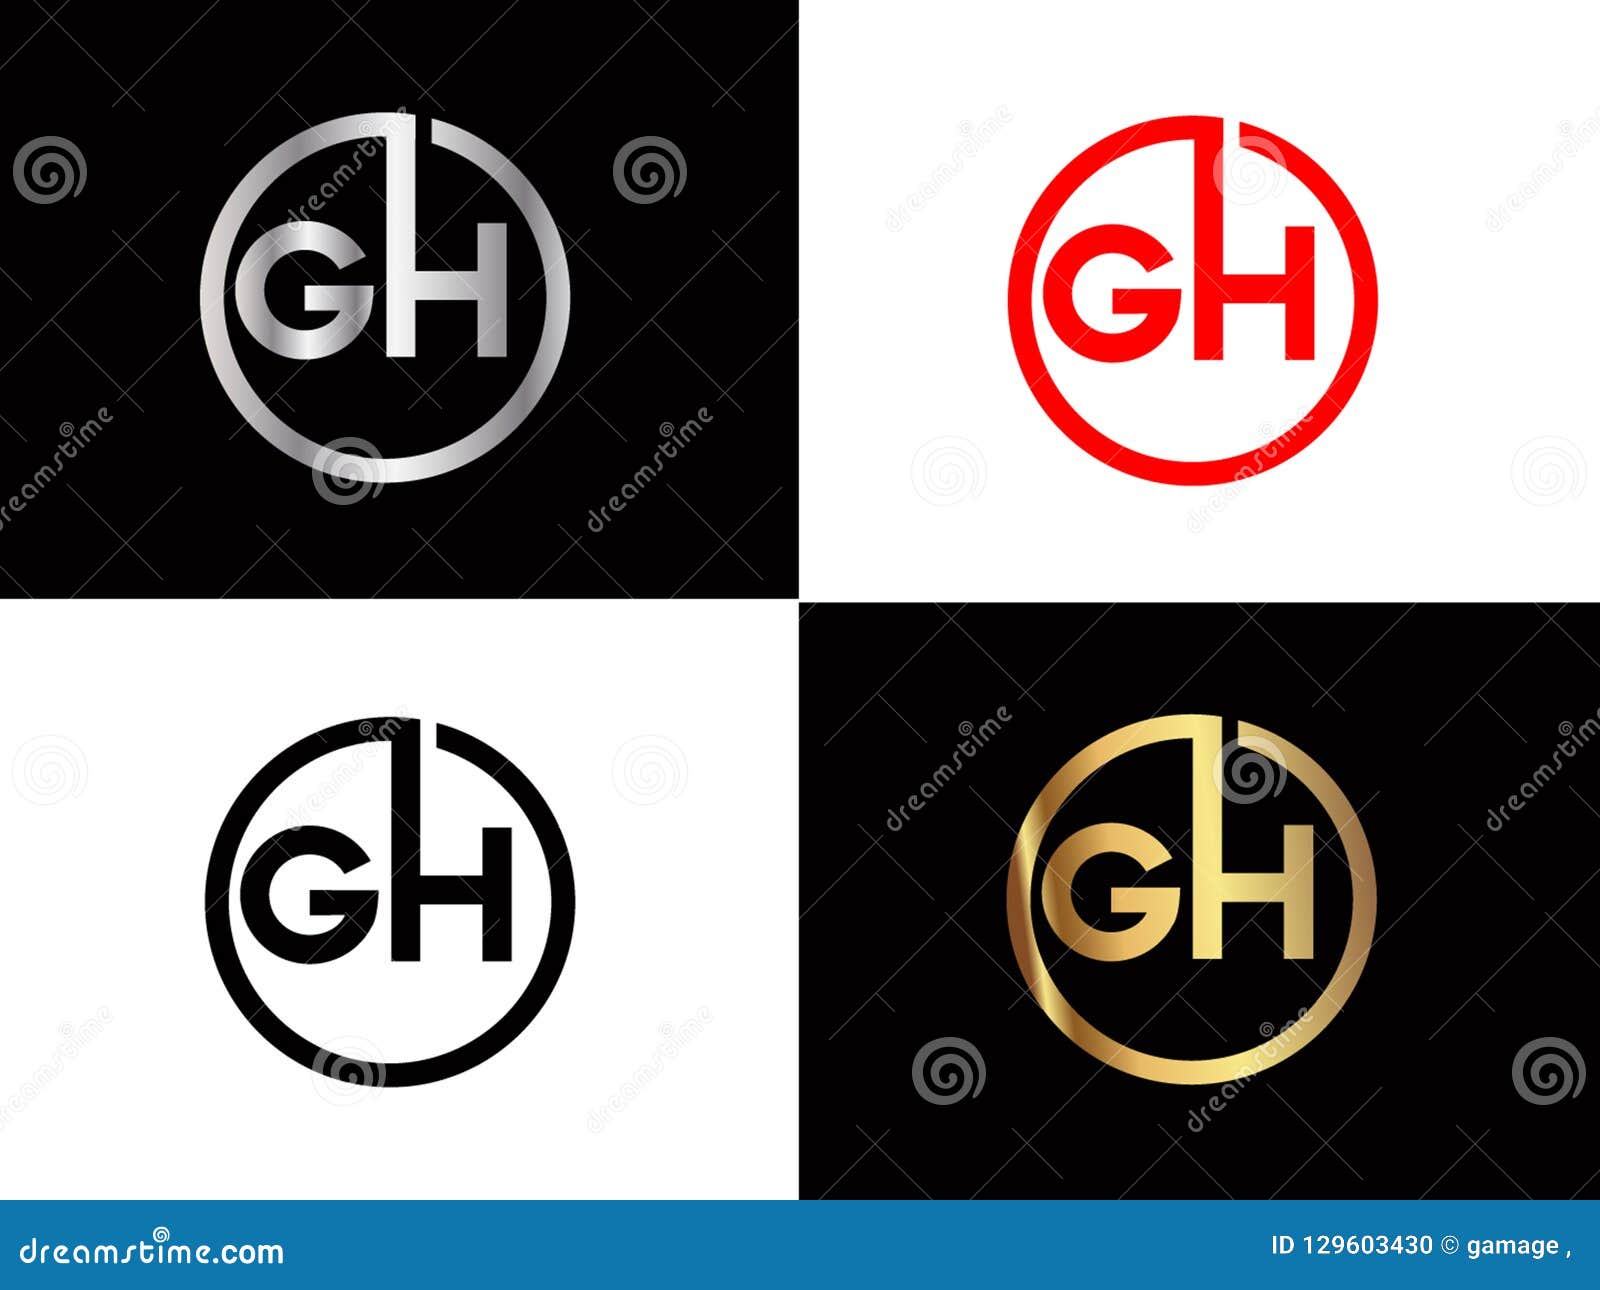 File:Ghosther-gh-logo.png - Wikimedia Commons